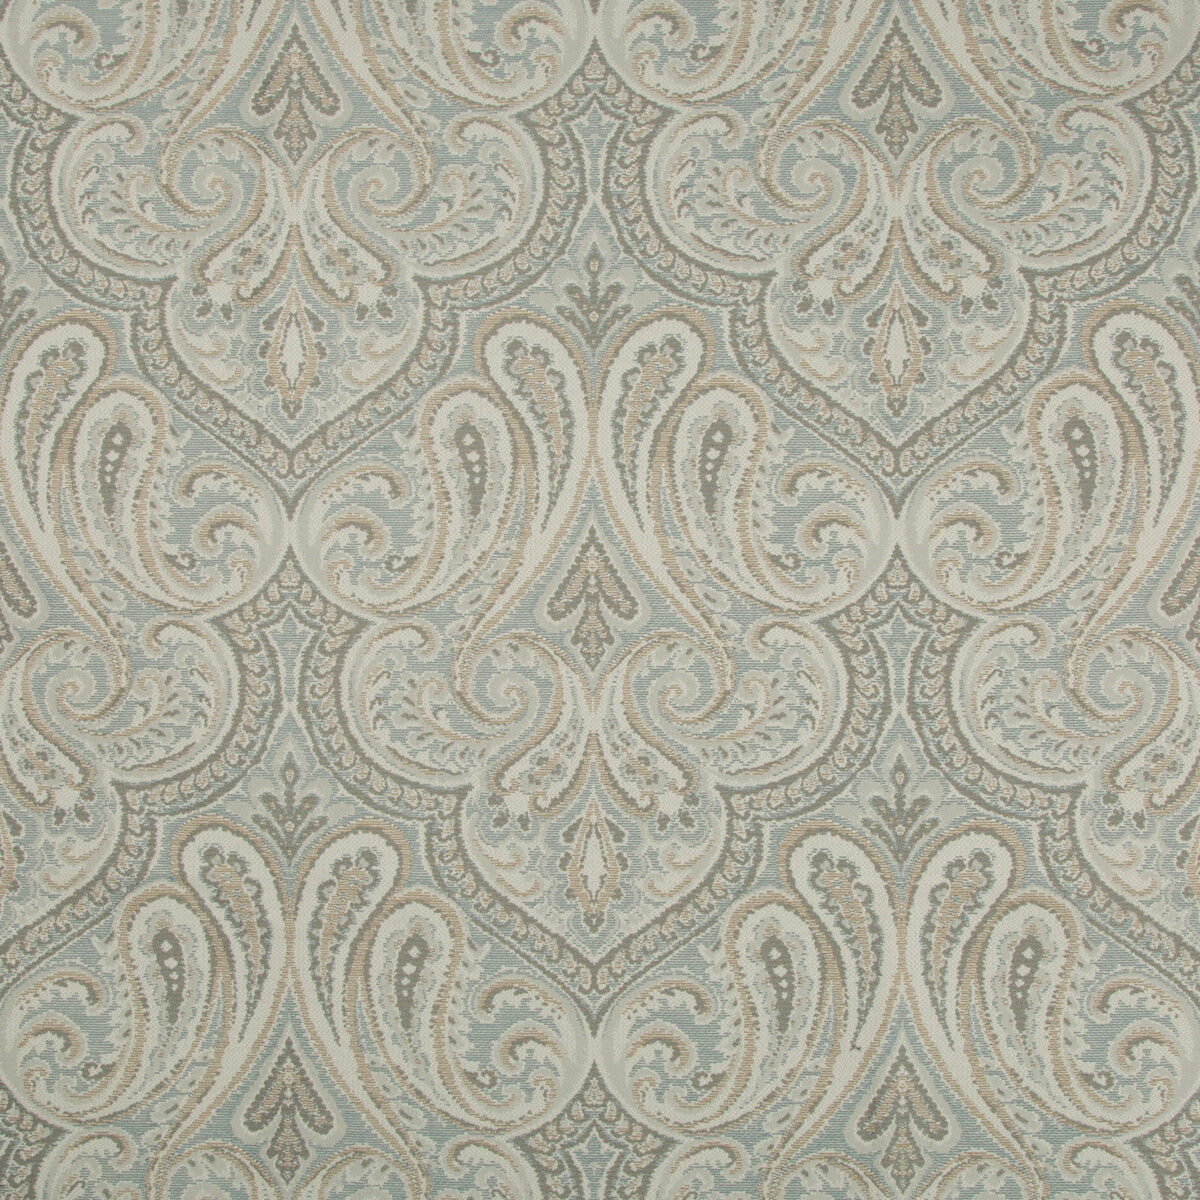 Kravet Design fabric in 34706-15 color - pattern 34706.15.0 - by Kravet Design in the Crypton Home collection